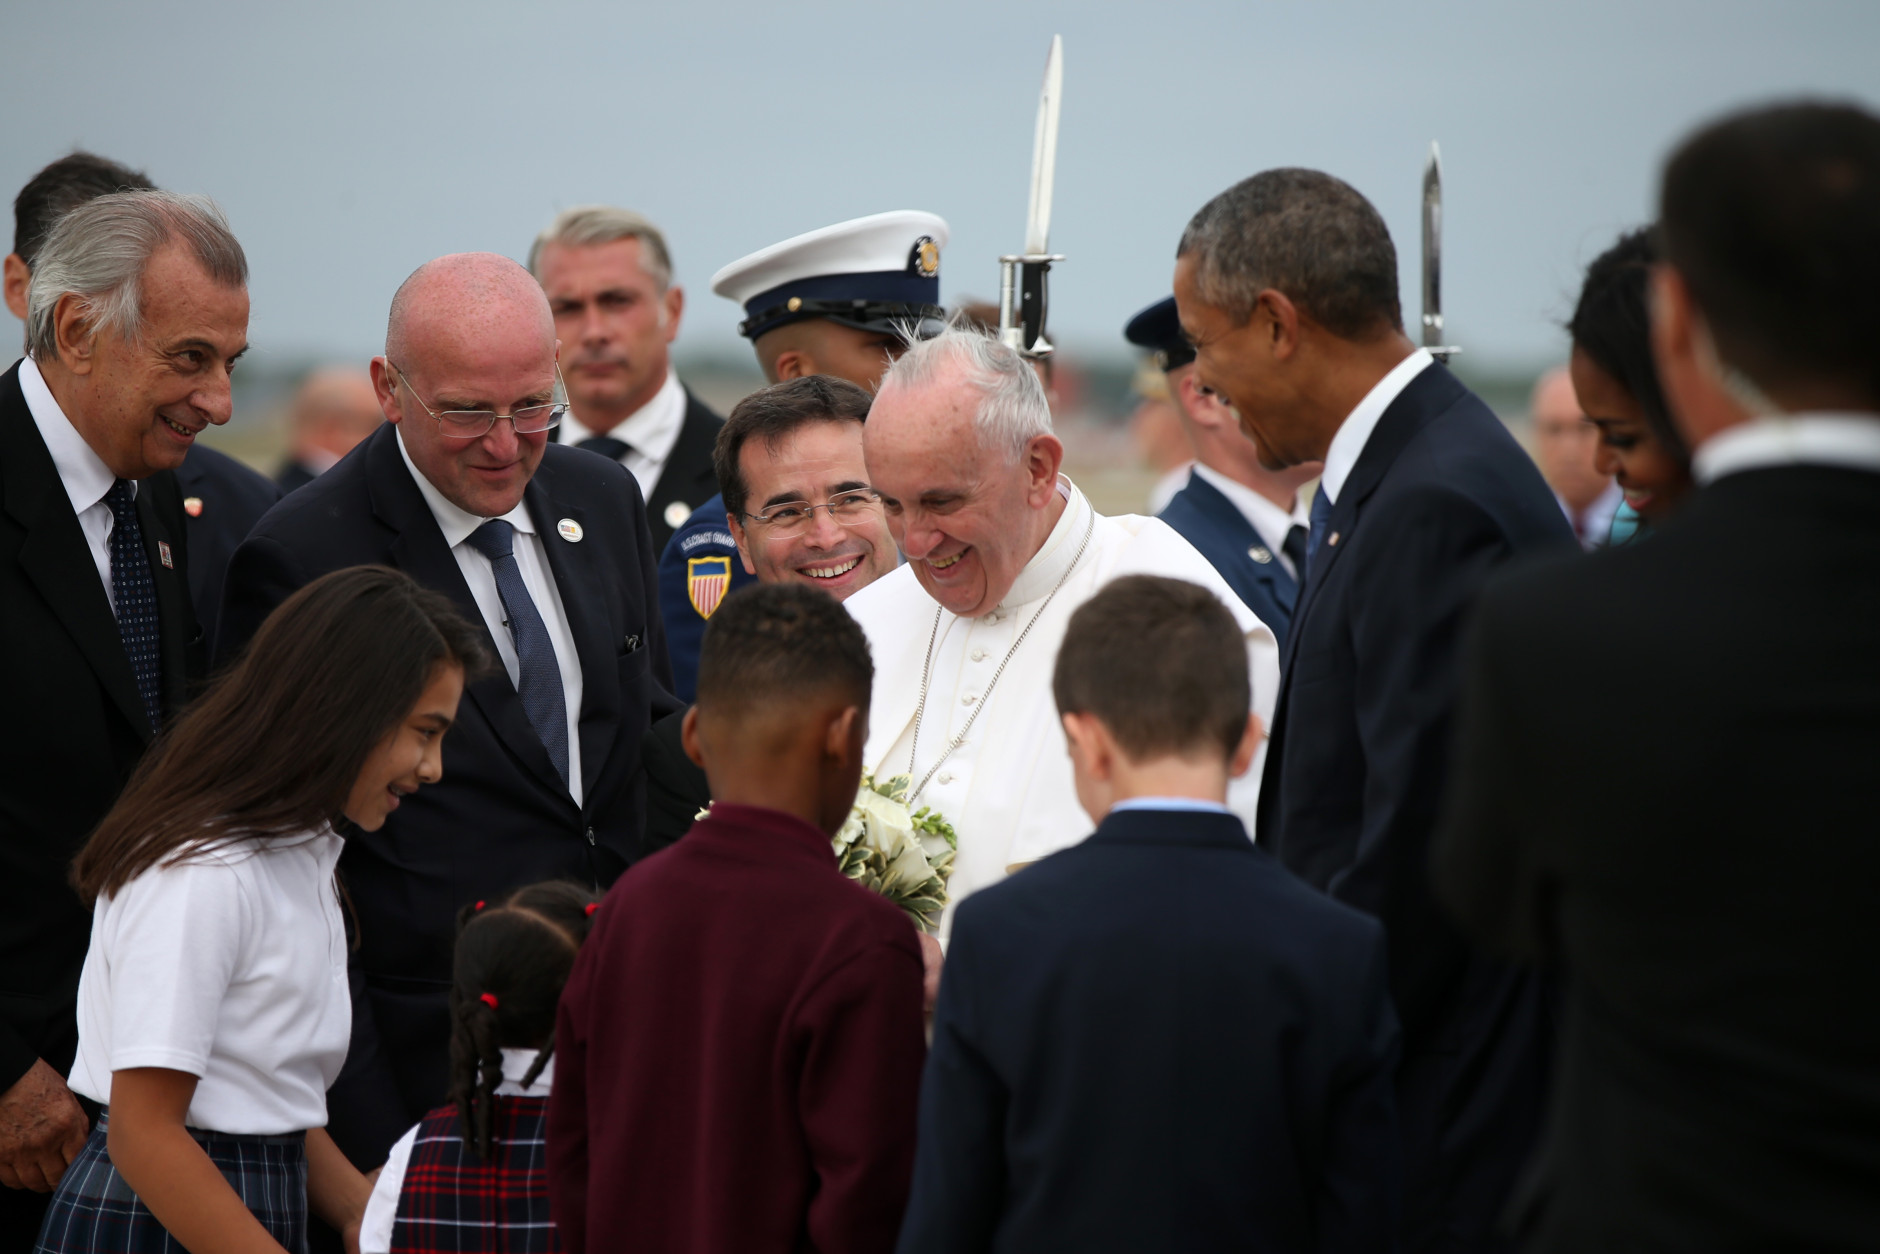 Pope Francis, accompanied by President Barack Obama, and others,  is greeted upon his arrival at Andrews Air Force Base, Md., Tuesday, Sept. 22, 2015. (AP Photo/Andrew Harnik)